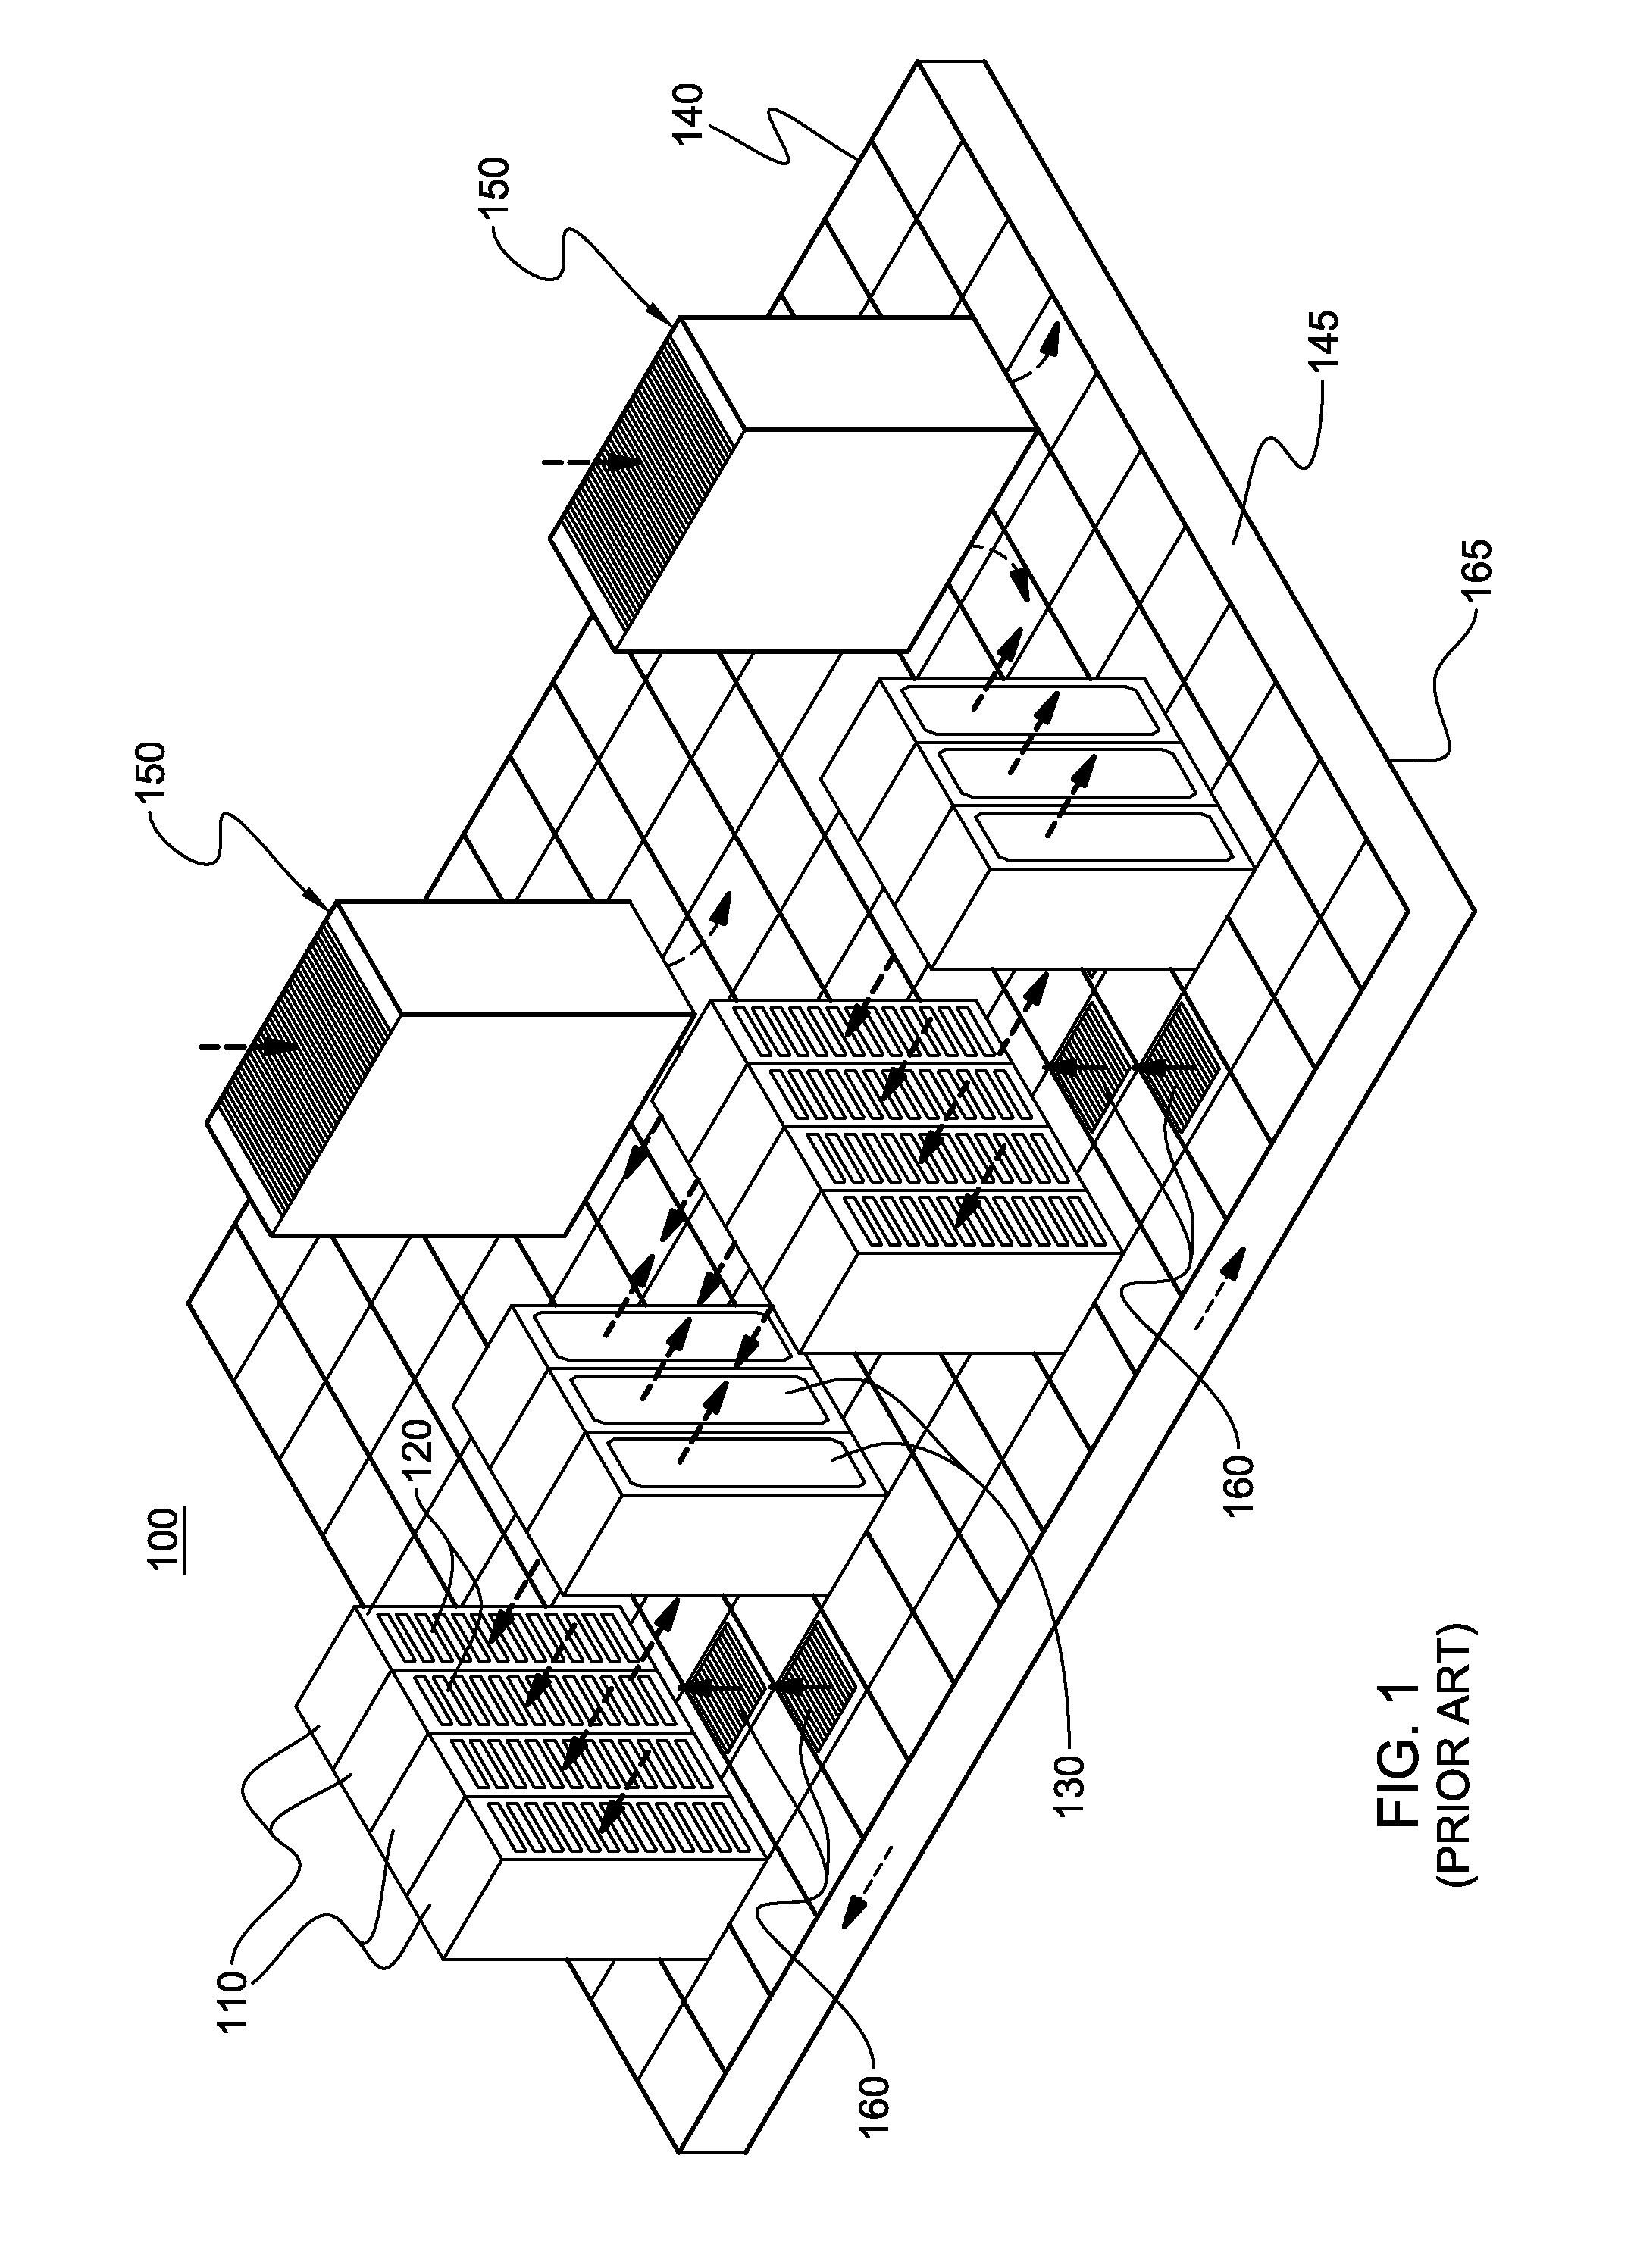 Interleaved, immersion-cooling apparatus and method for an electronic subsystem of an electronics rack